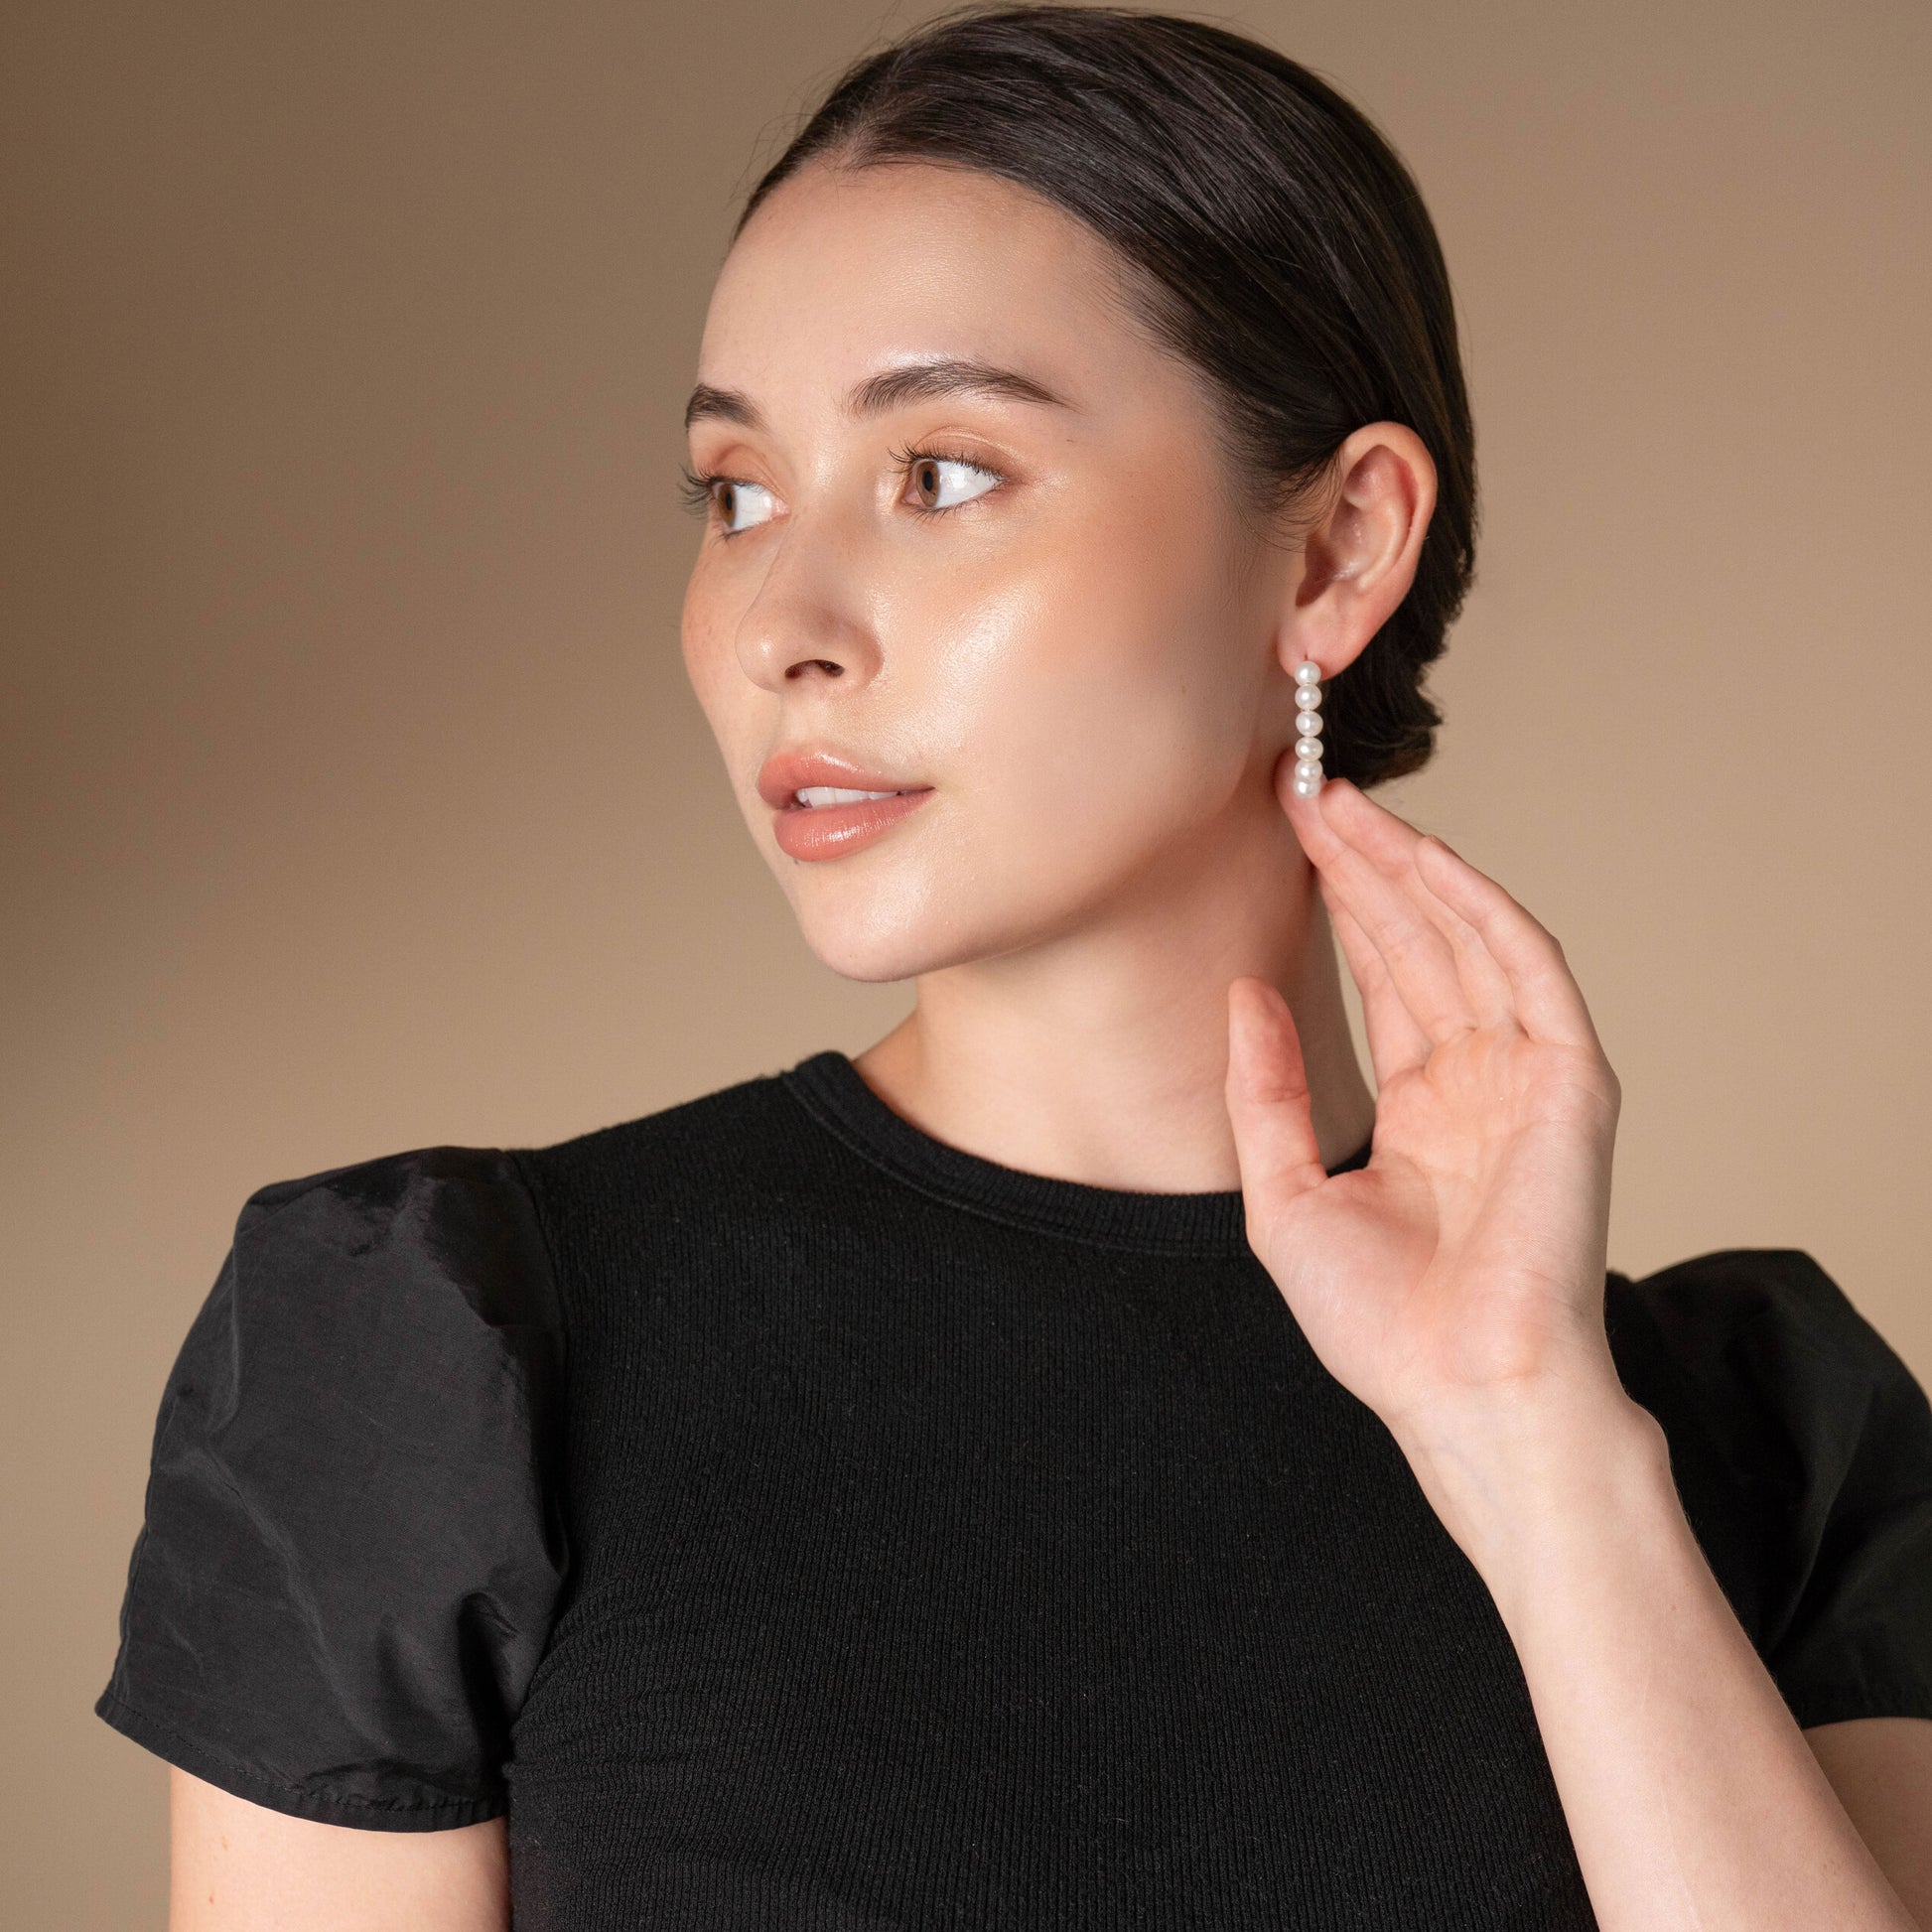 Embrace sophistication with a woman wearing a black top and captivating earrings.